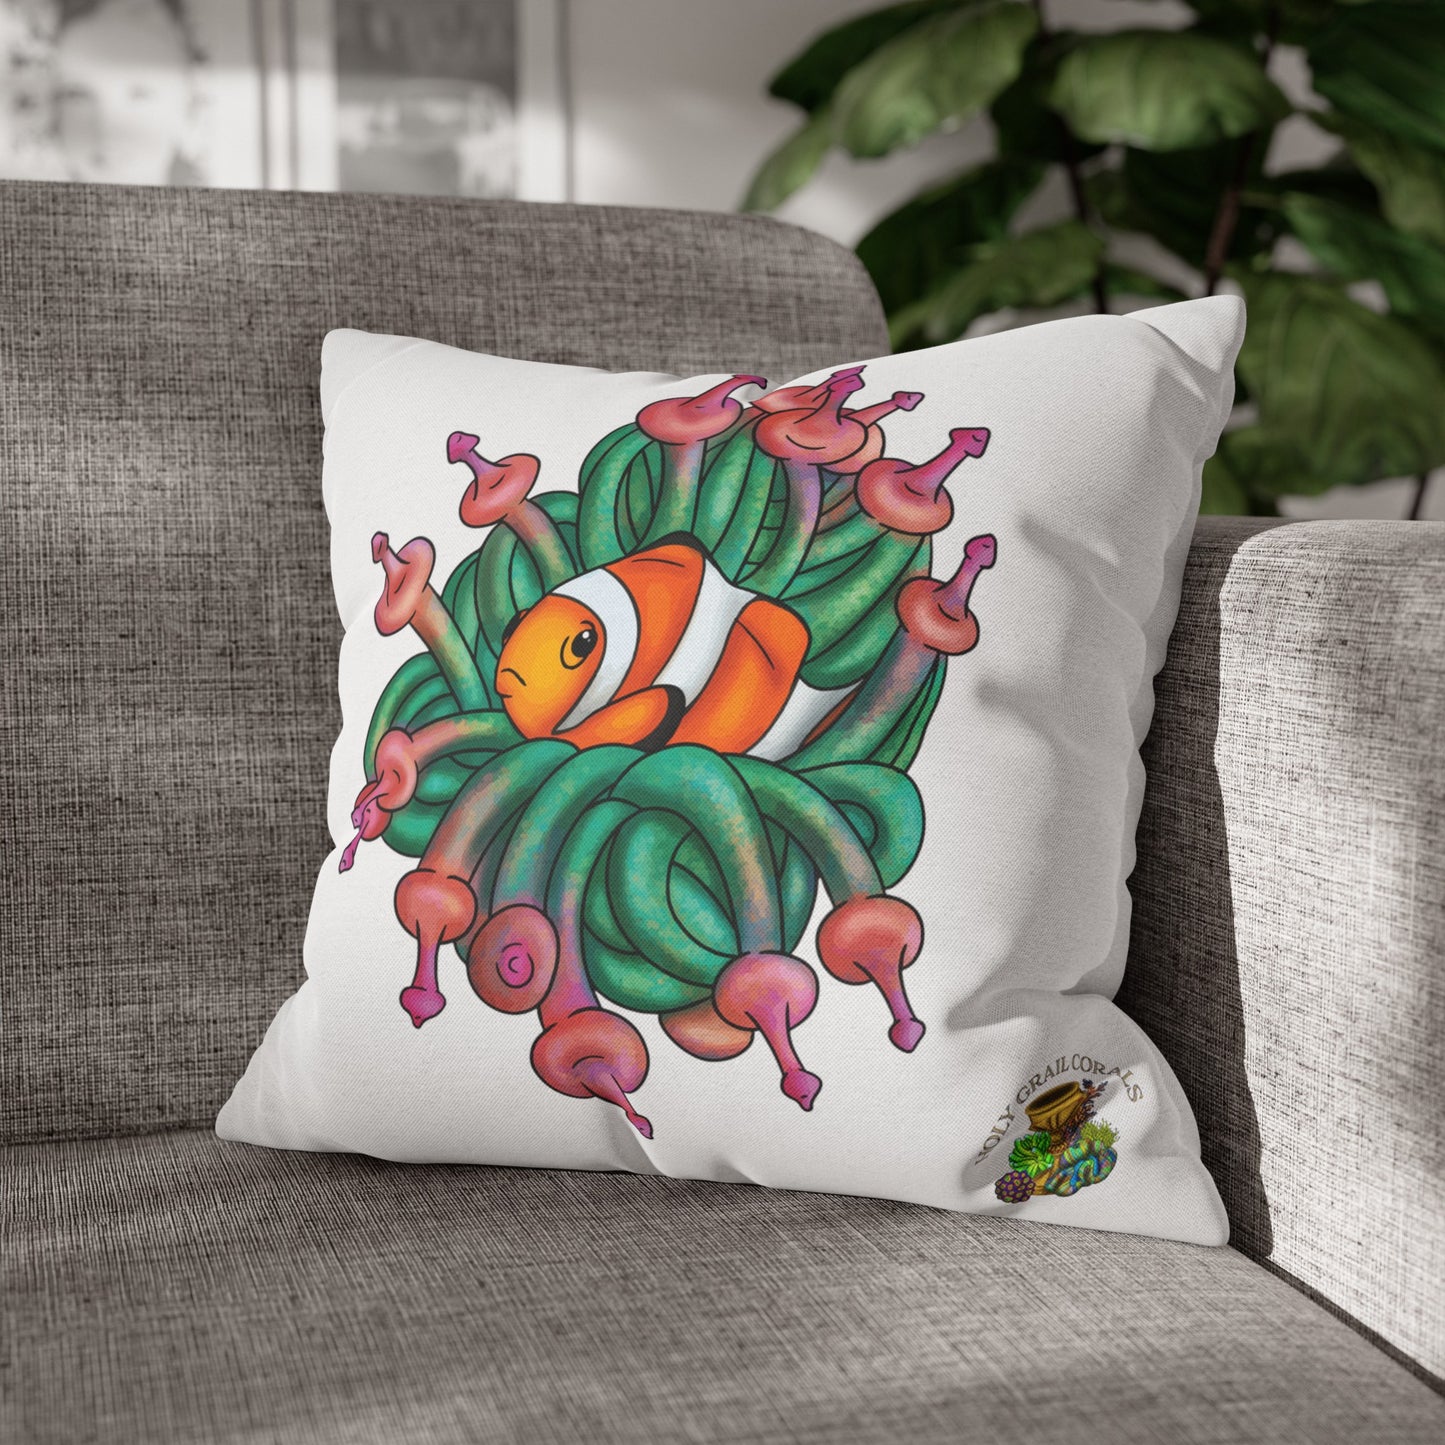 Clown Fish in Bubble Tip Anemone Square Pillow Cover